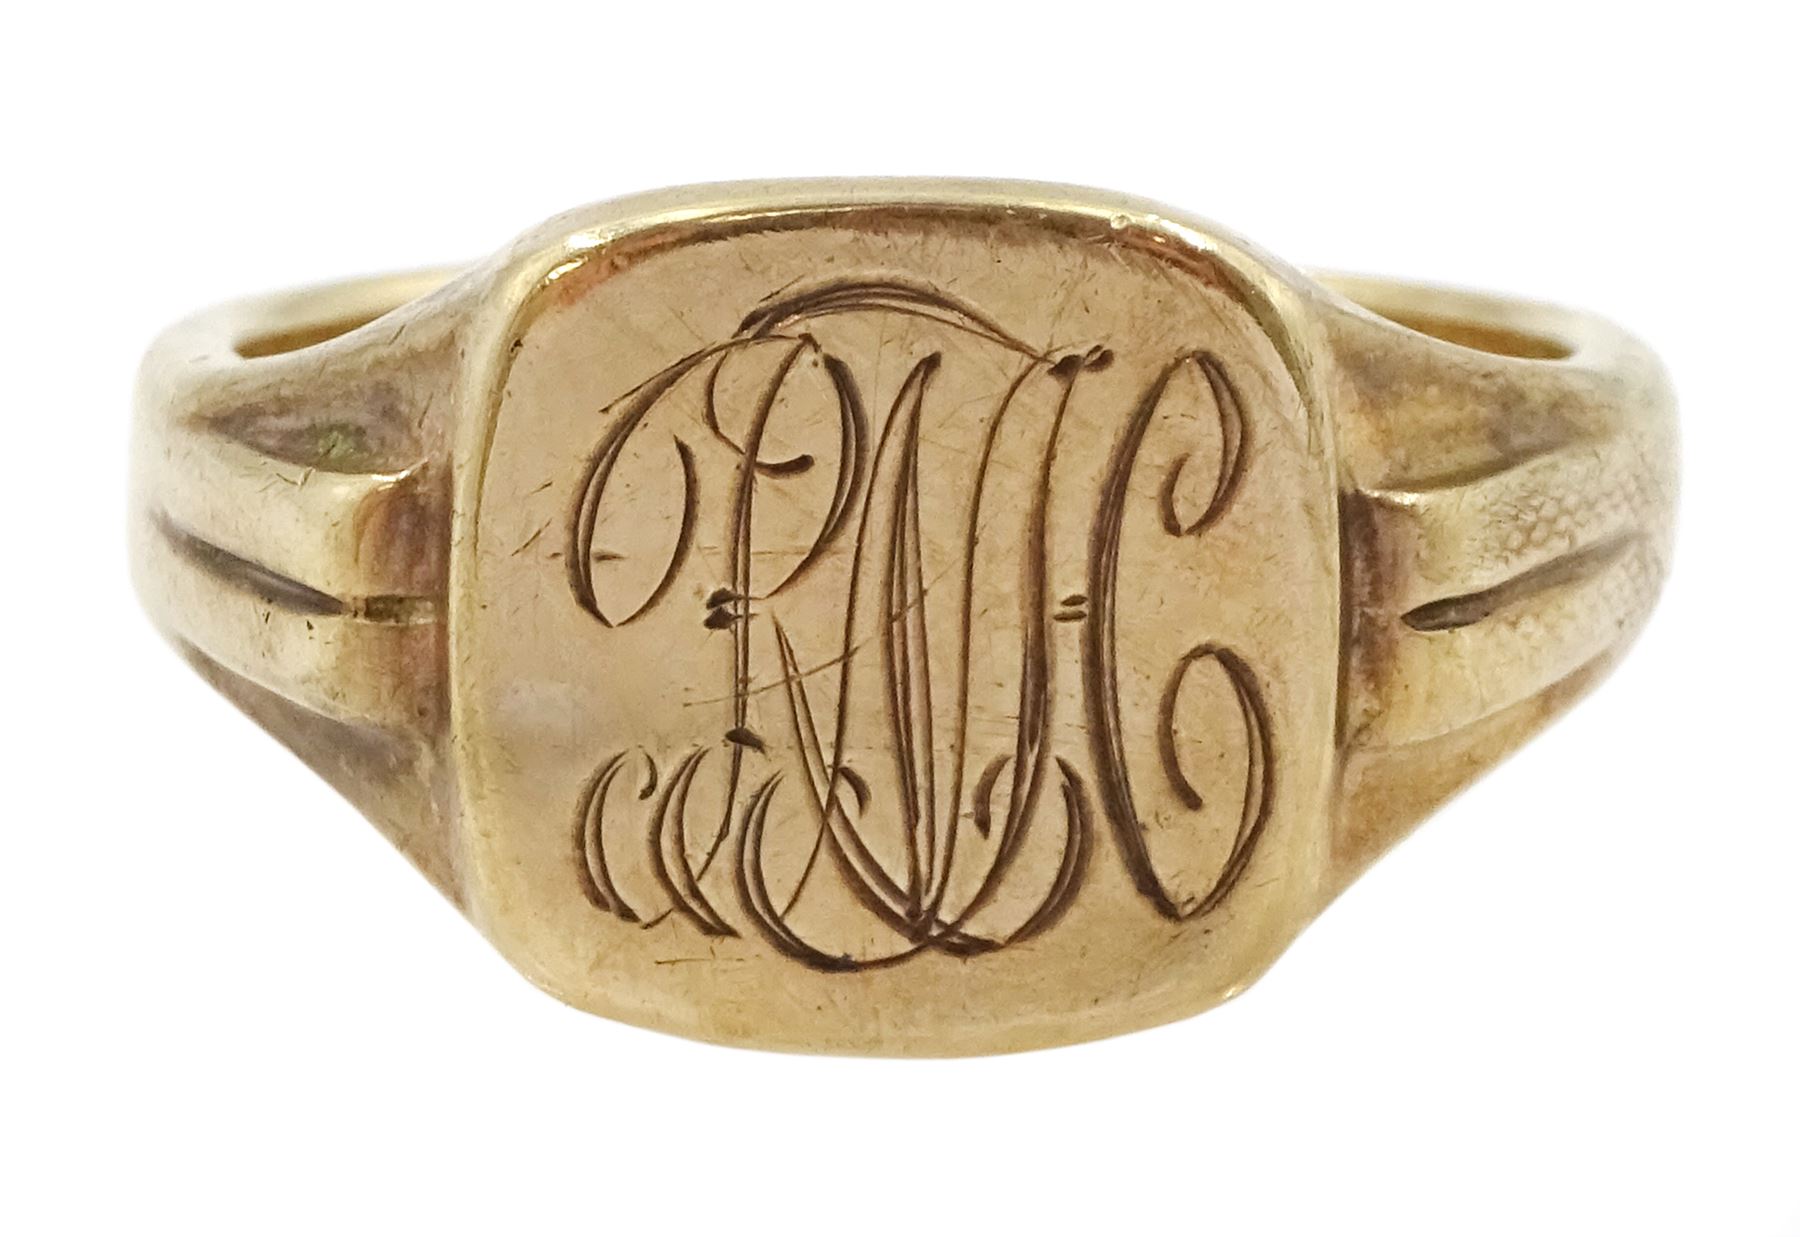 9ct gold signet ring with engraved initials 'RHN'